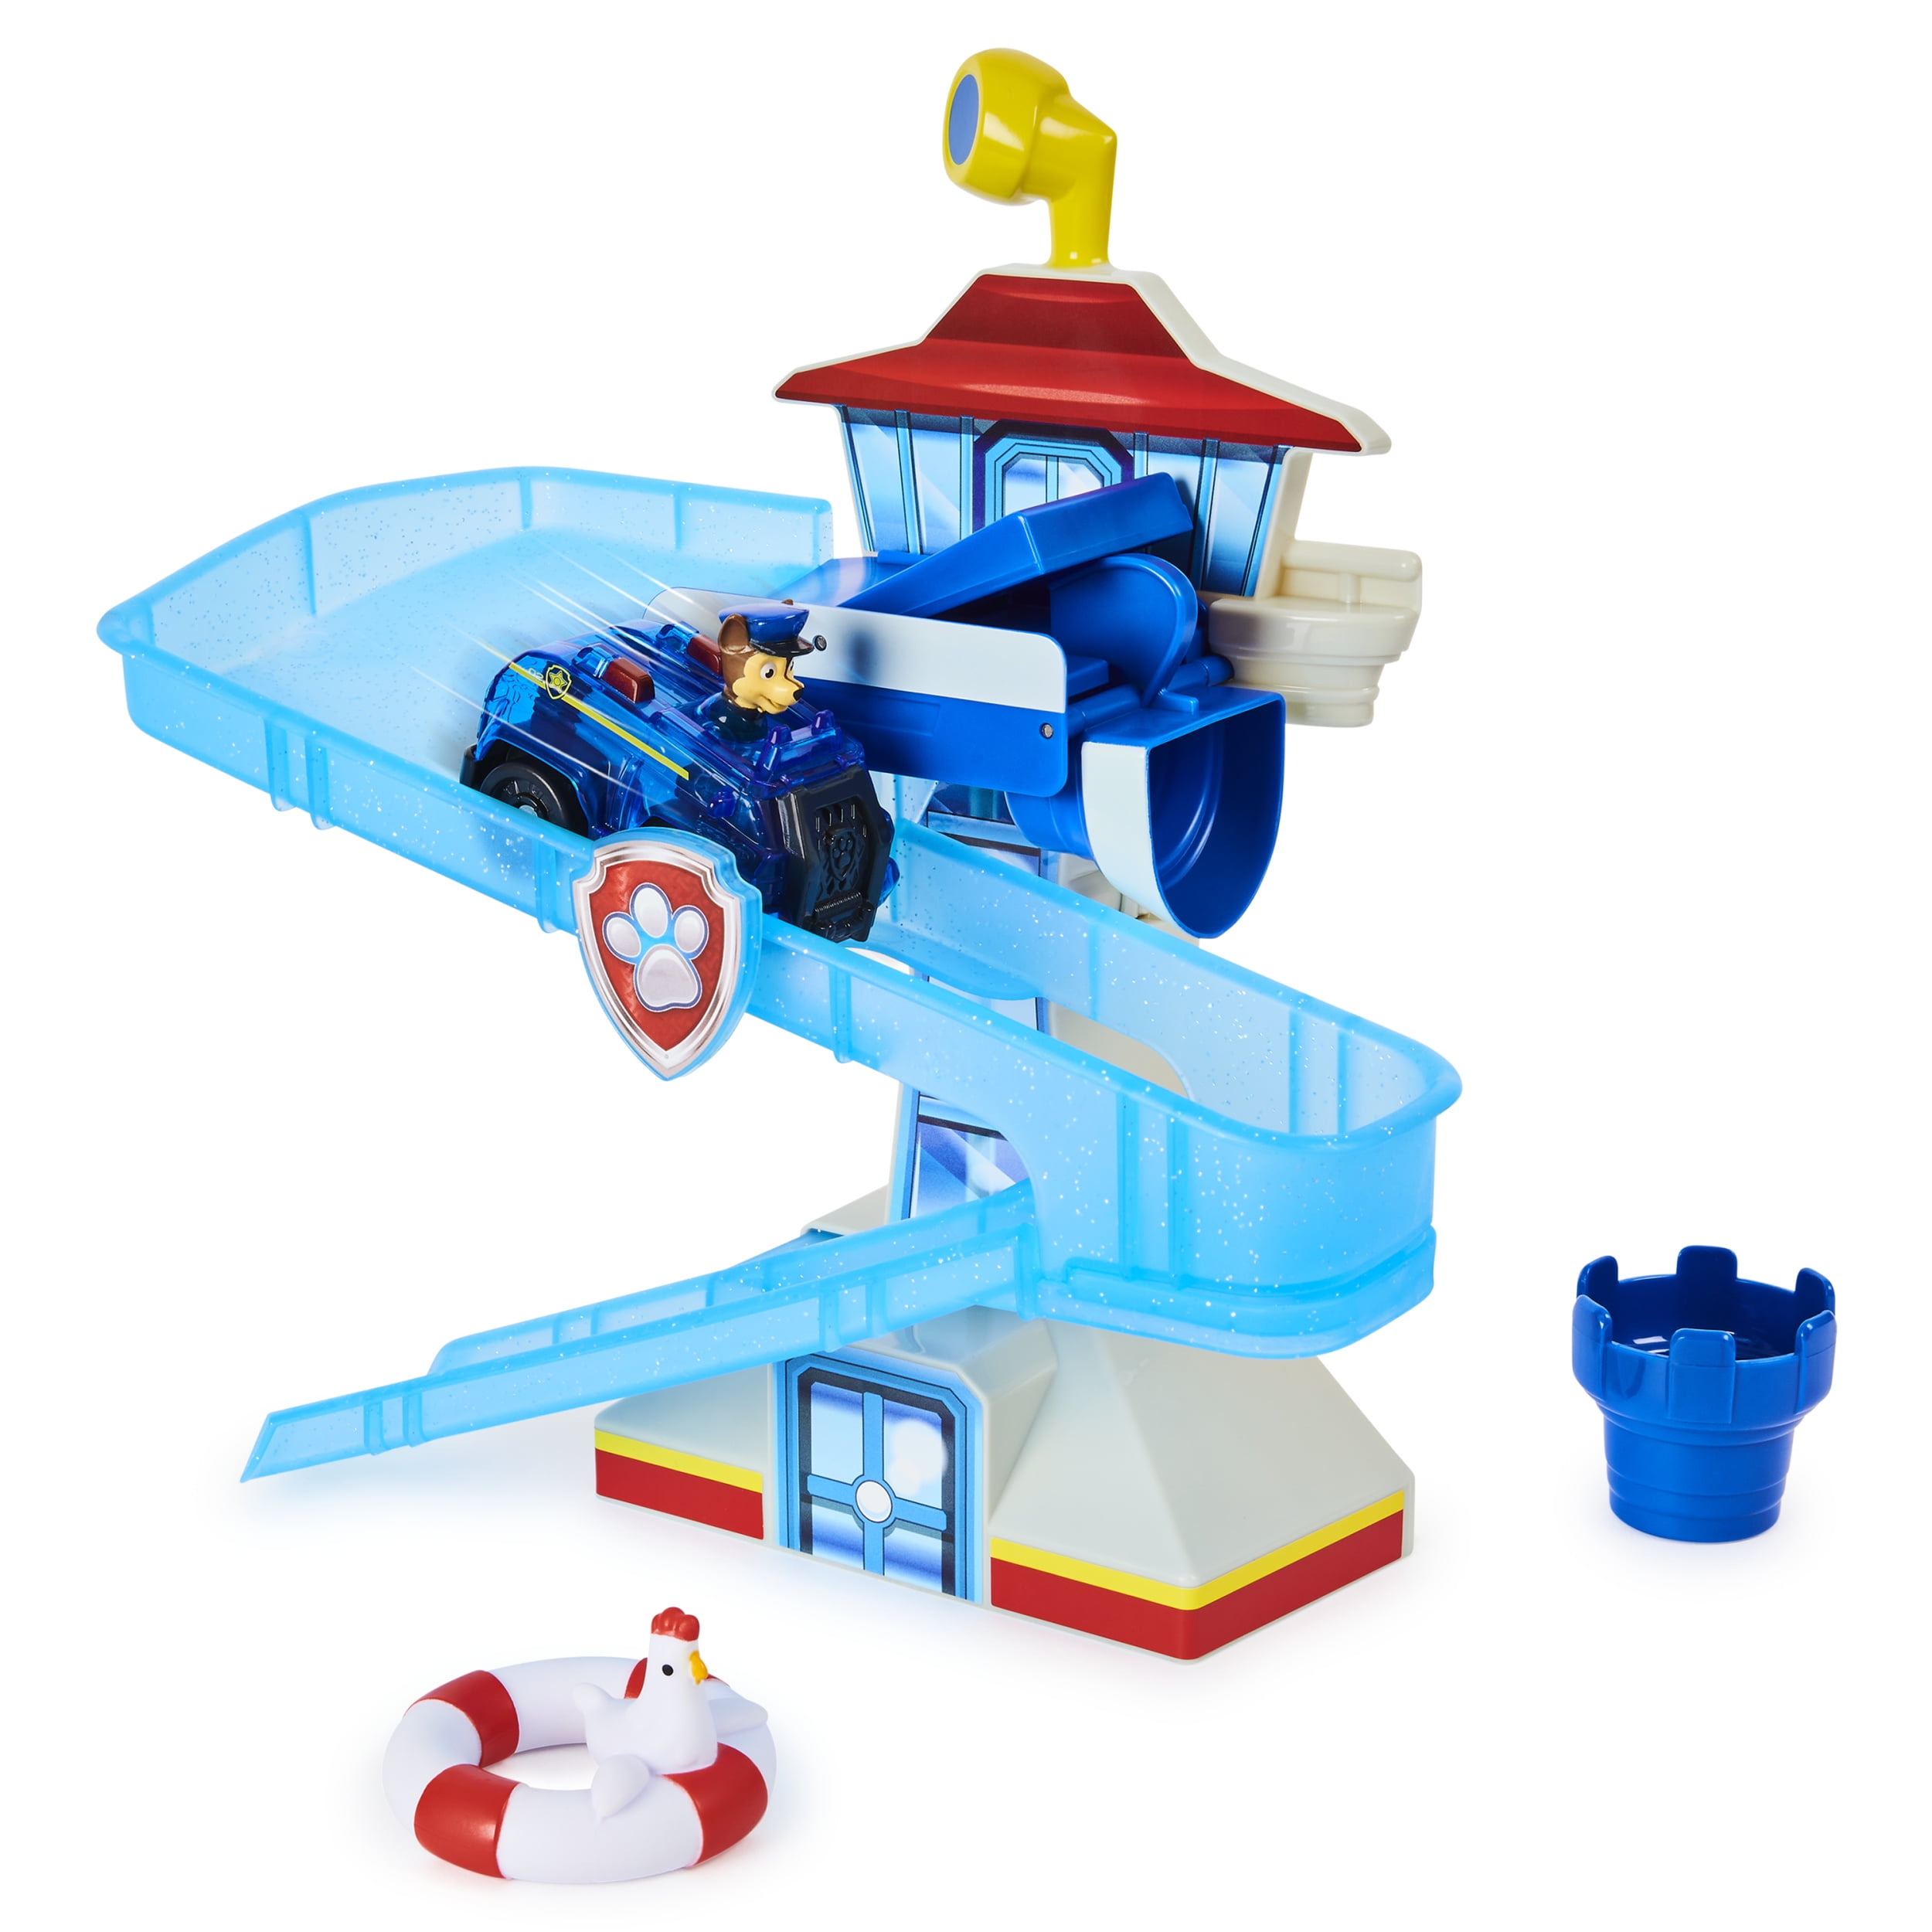 Patrol, Adventure Bay Bath Playset with Light-up Chase Vehicle, Bath Toy for Kids Aged 3 and up - Walmart.com